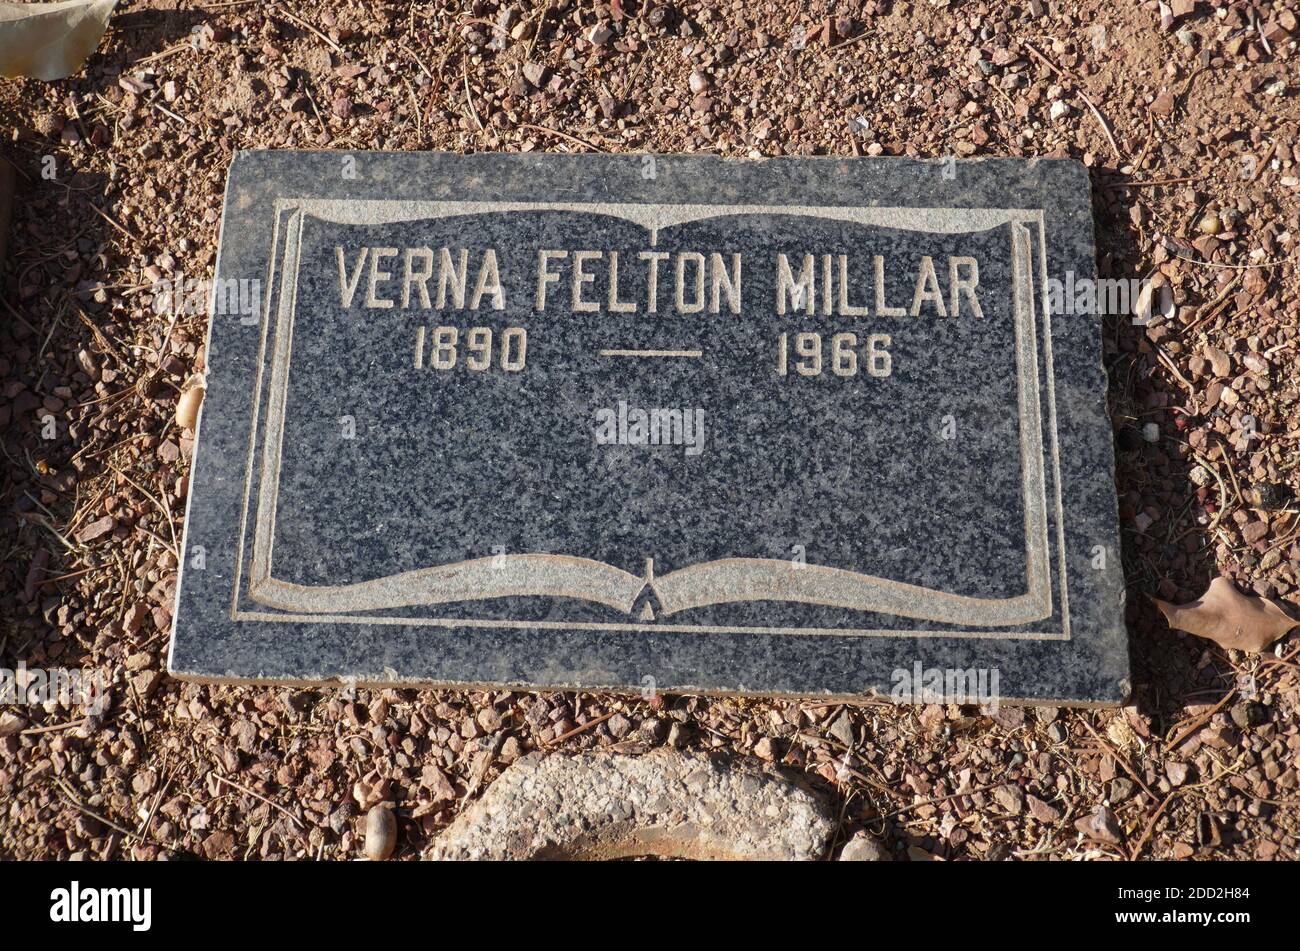 Glendale, California, USA 18th November 2020 A general view of atmosphere of actress Verna Felton's Grave at Grand View Memorial Park on November 18, 2020 at 1341 Glenwood Road in Glendale, California, USA. Photo by Barry King/Alamy Stock Photo Stock Photo